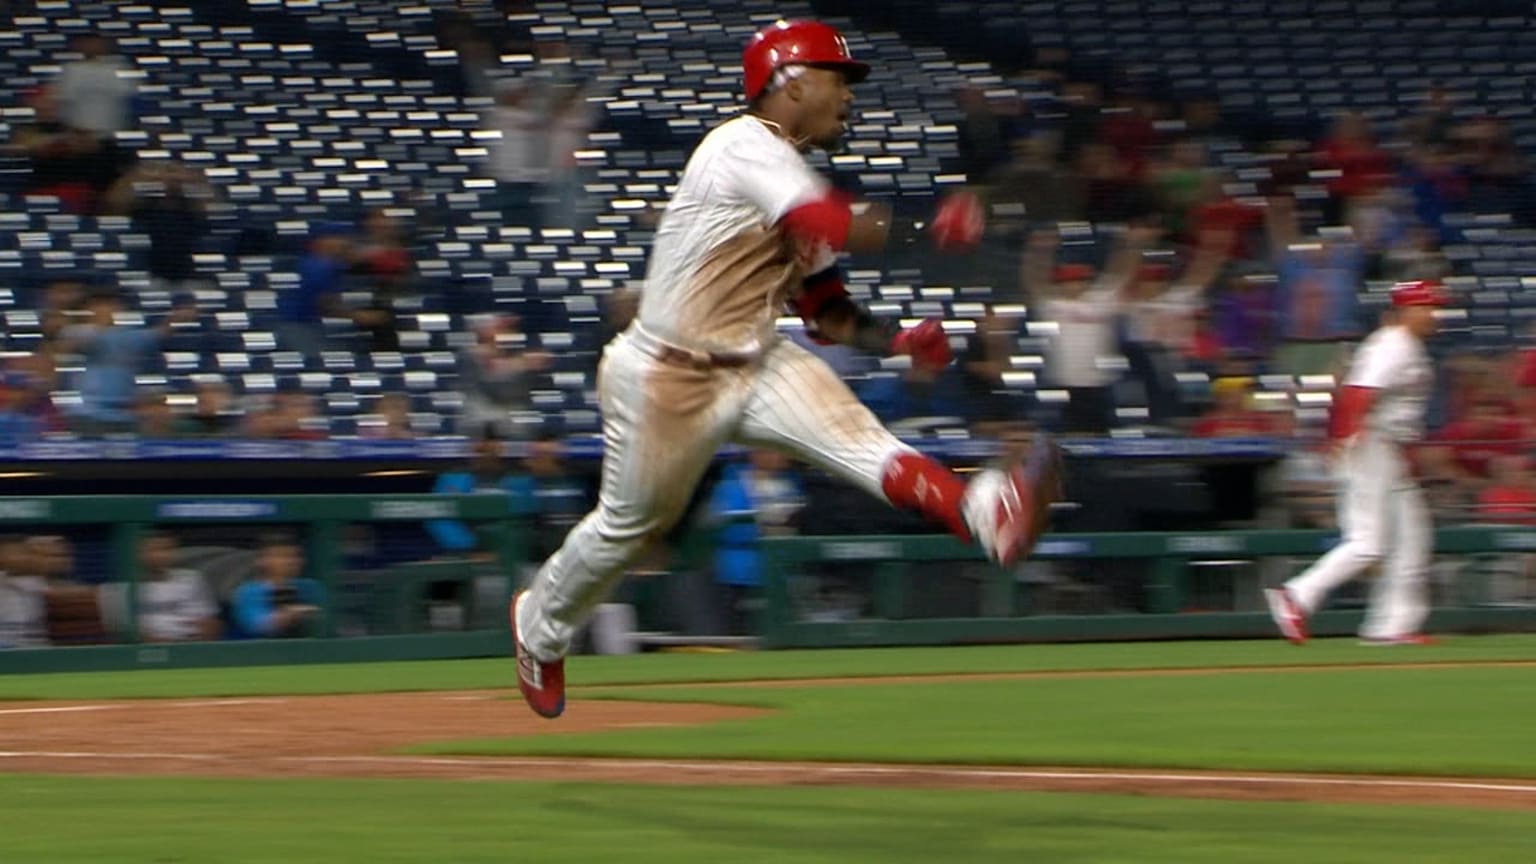 Phillies shortstop Jean Segura exits after taking fastball off